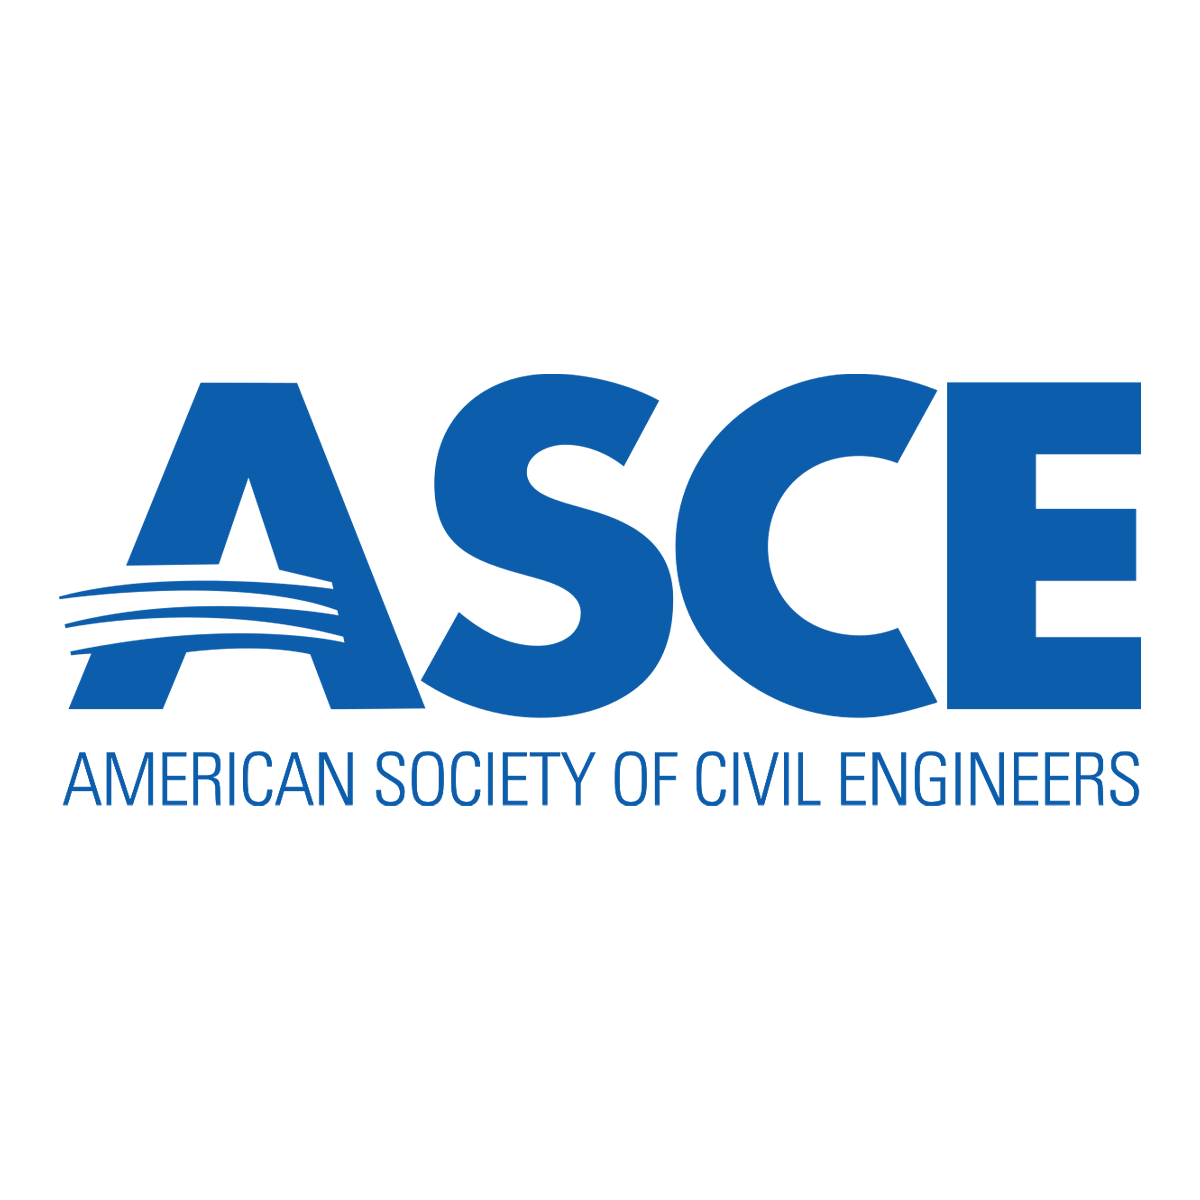 American Society of Civil Engineers (ASCE) 